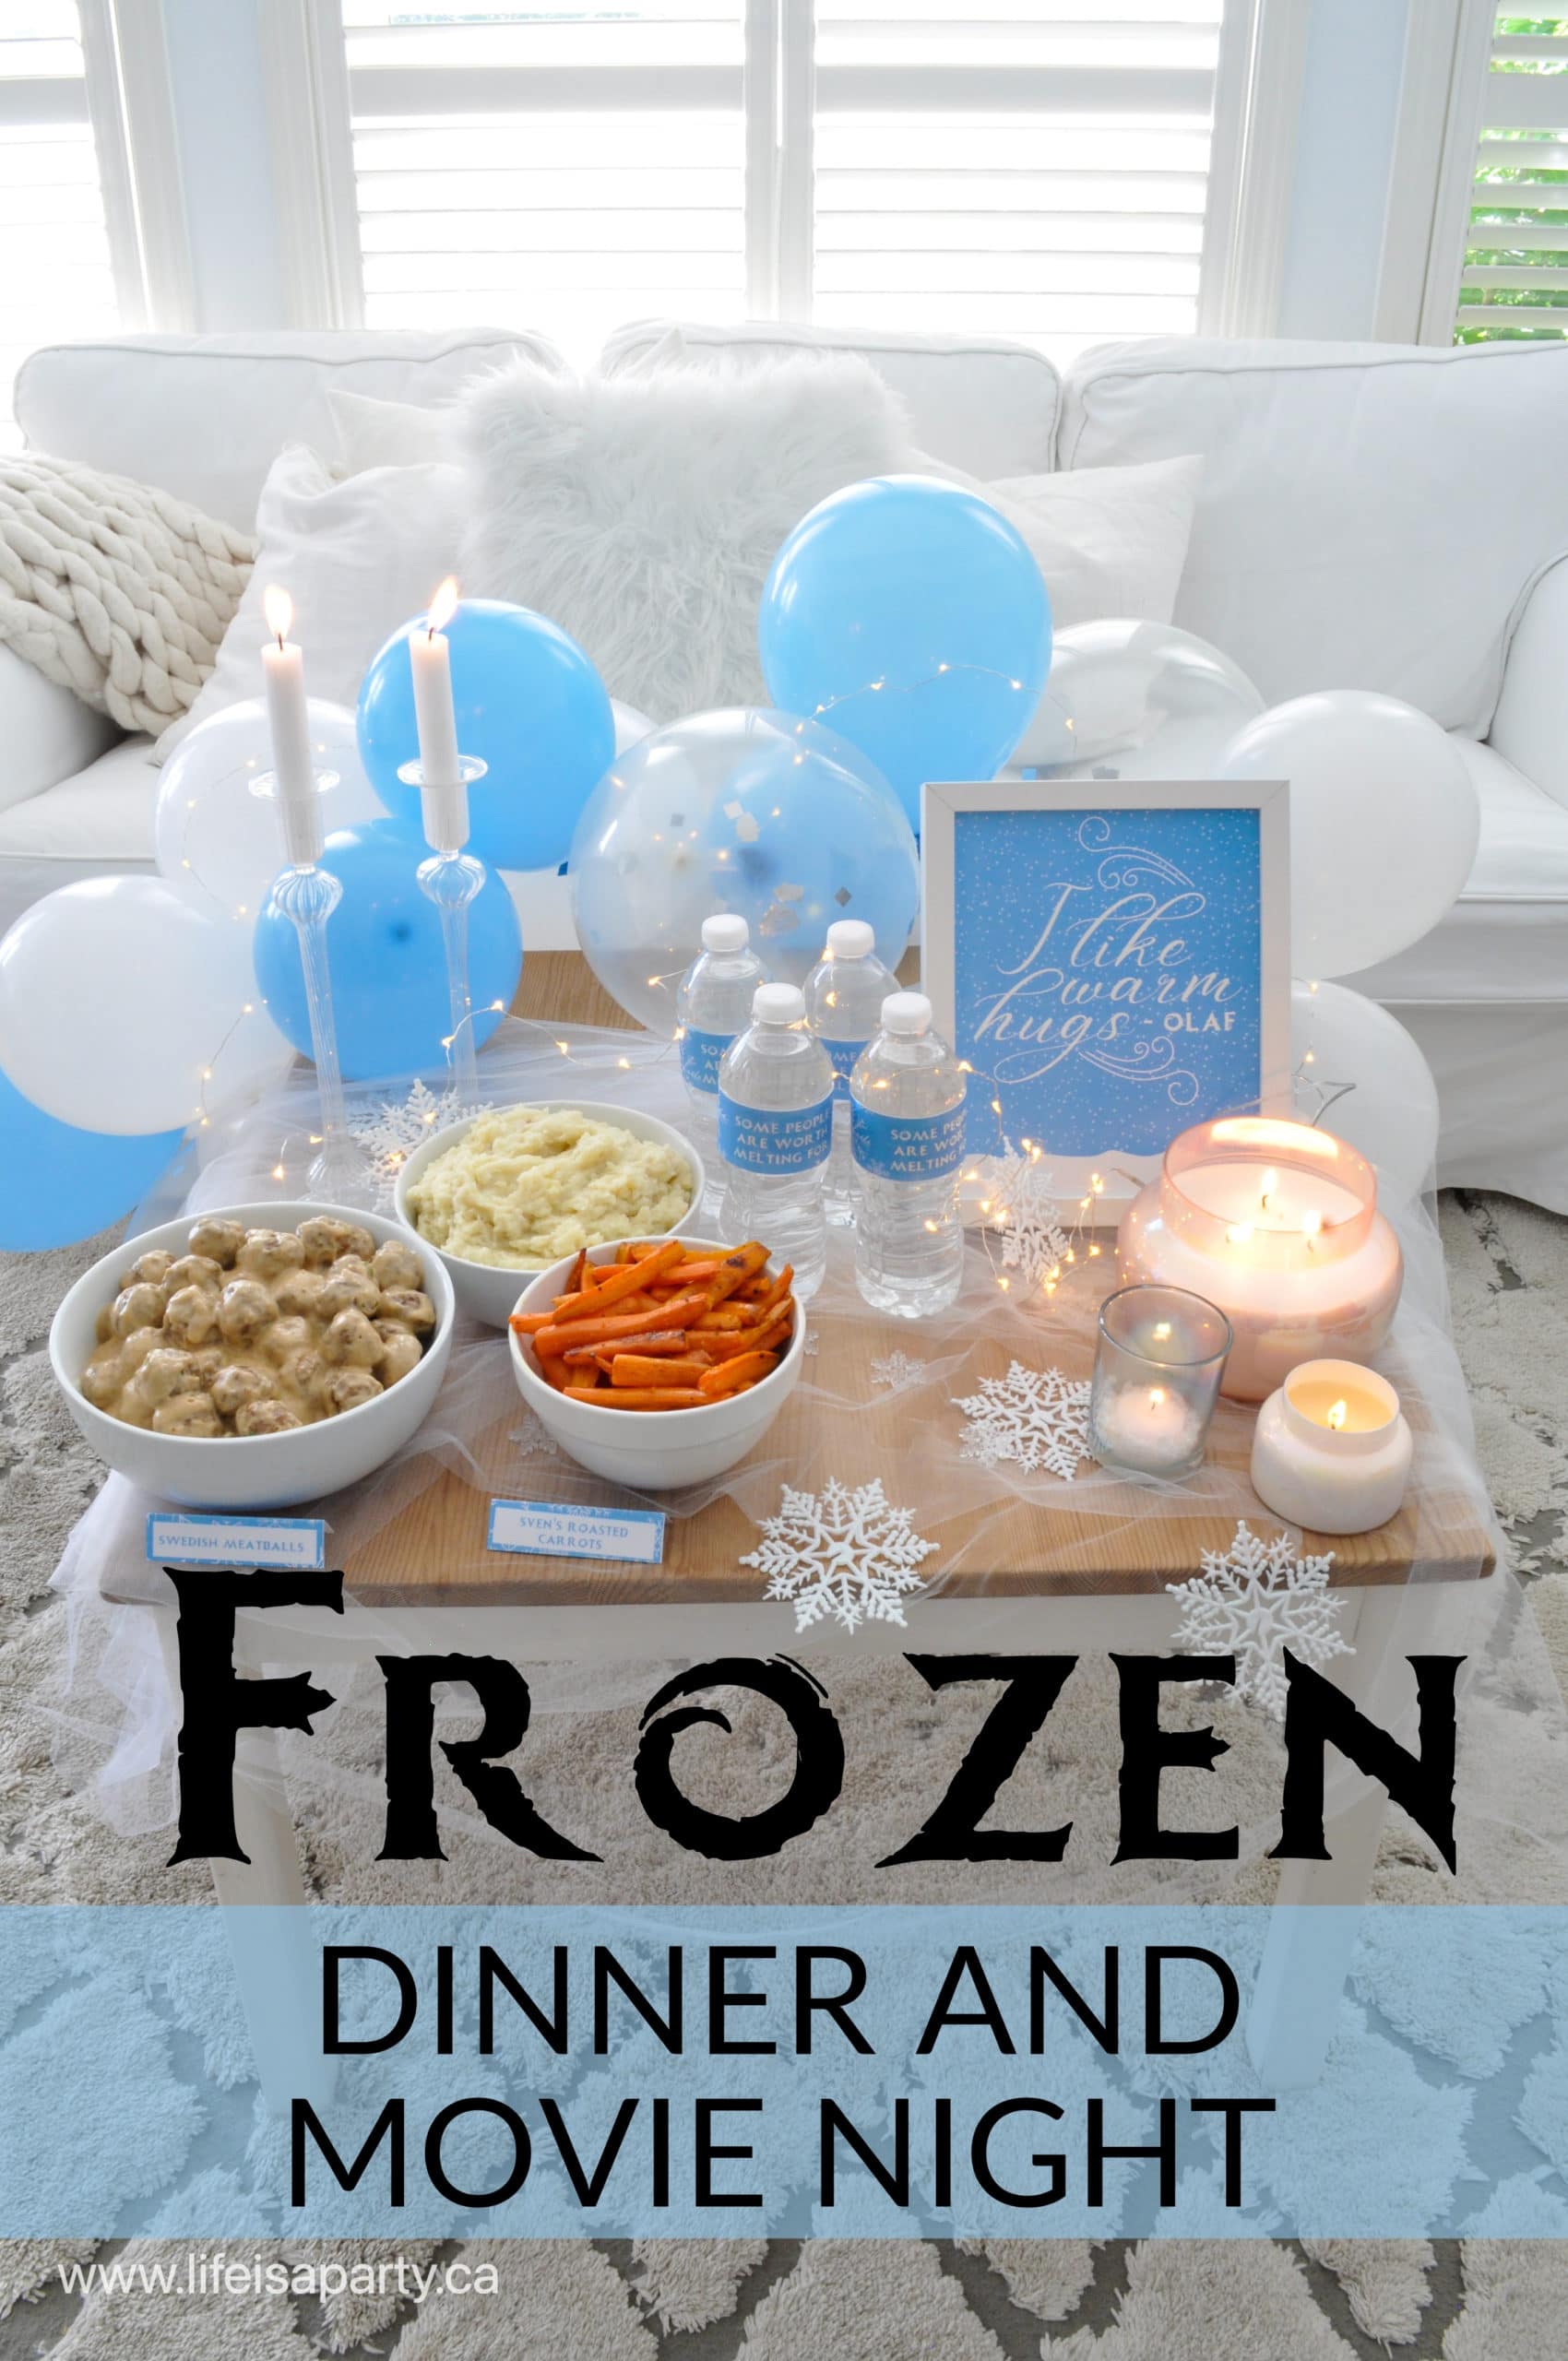 Frozen themed party